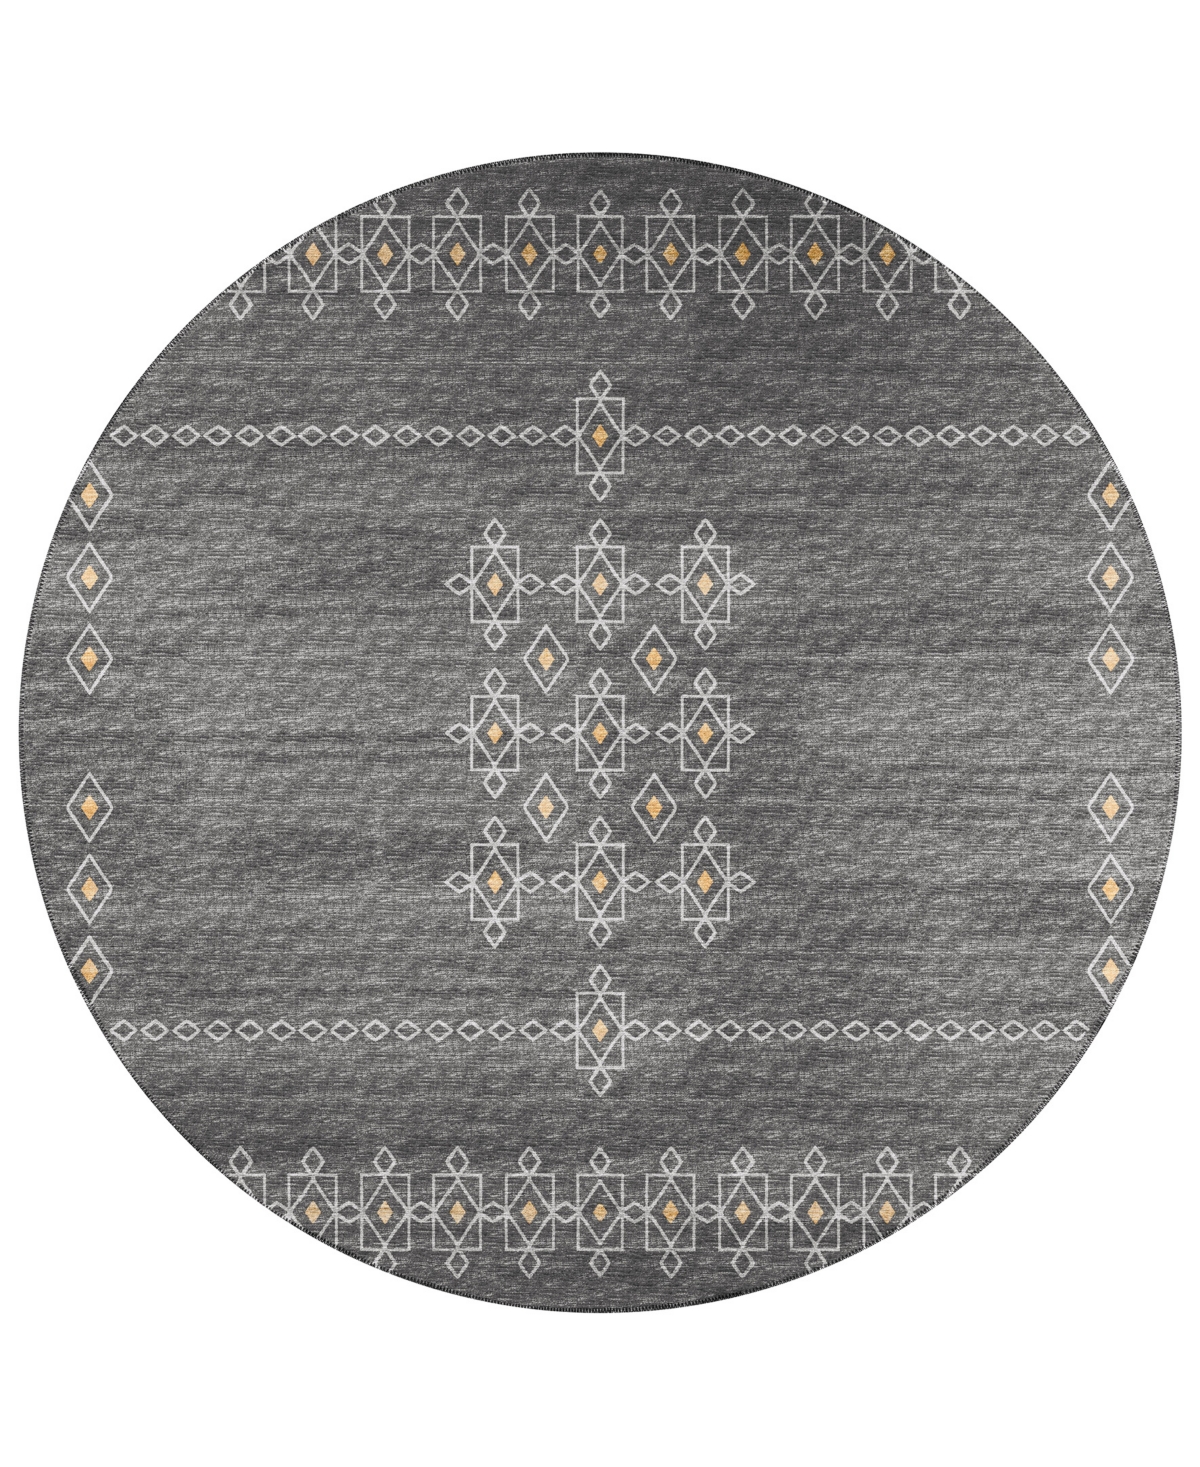 D Style Buttes BTS3 6' x 6' Round Area Rug - Charcoal